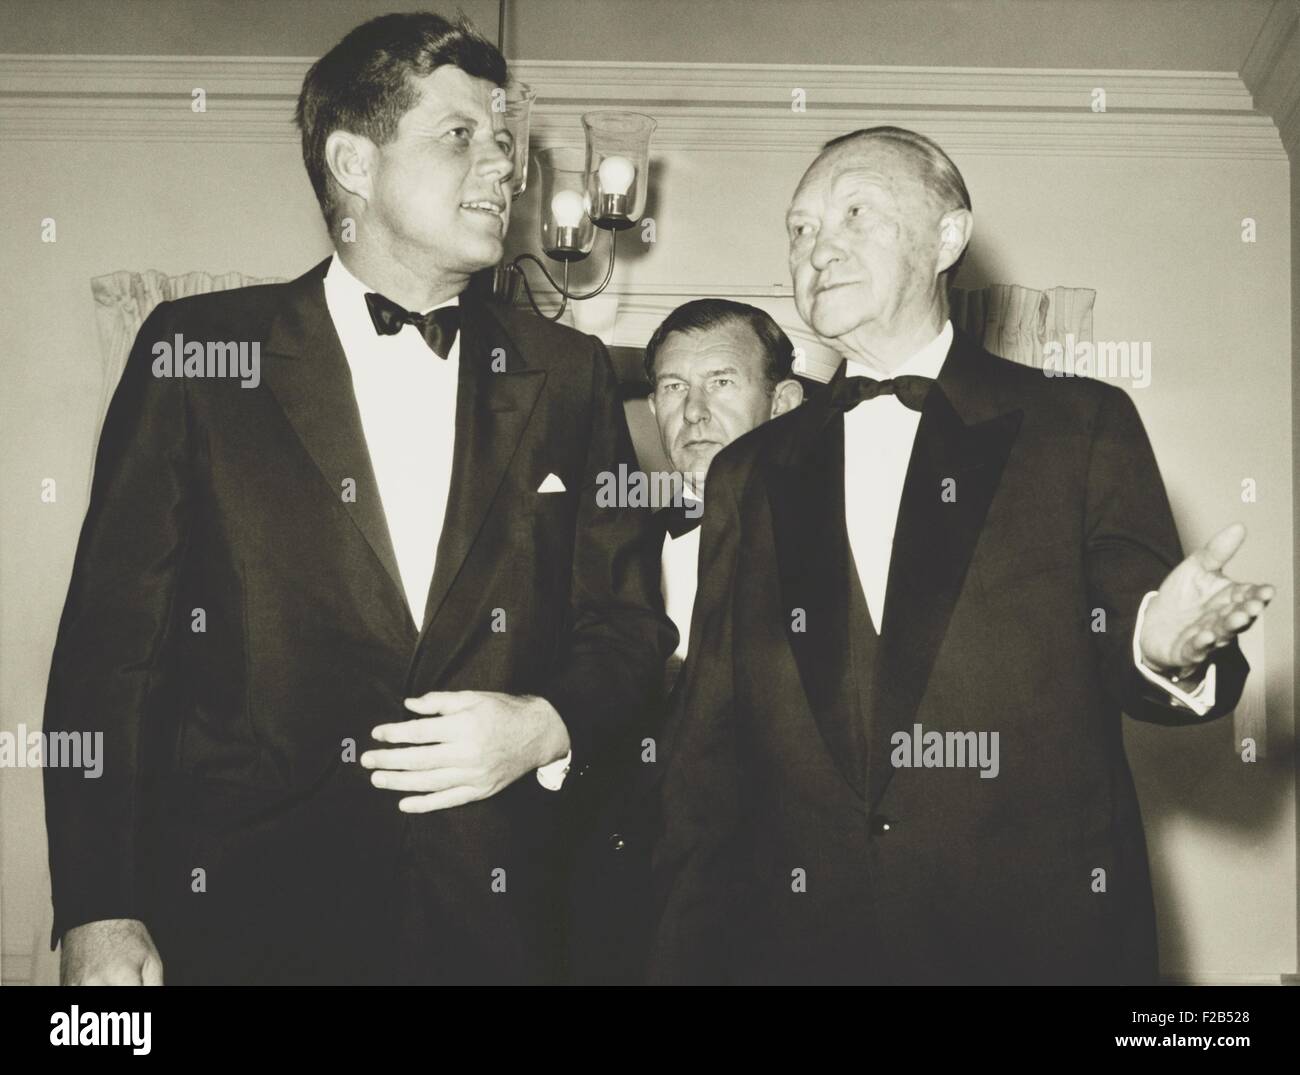 West German Chancellor Konrad Adenauer with President John Kennedy at the German Embassy. Nov. 21, 1961. West Germany and West Berlin were among the most contentious places of the Cold War. West German Ambassador to the U.S. Wilhelm Grewe is in the background. - (BSLOC 2015 1 134) Stock Photo